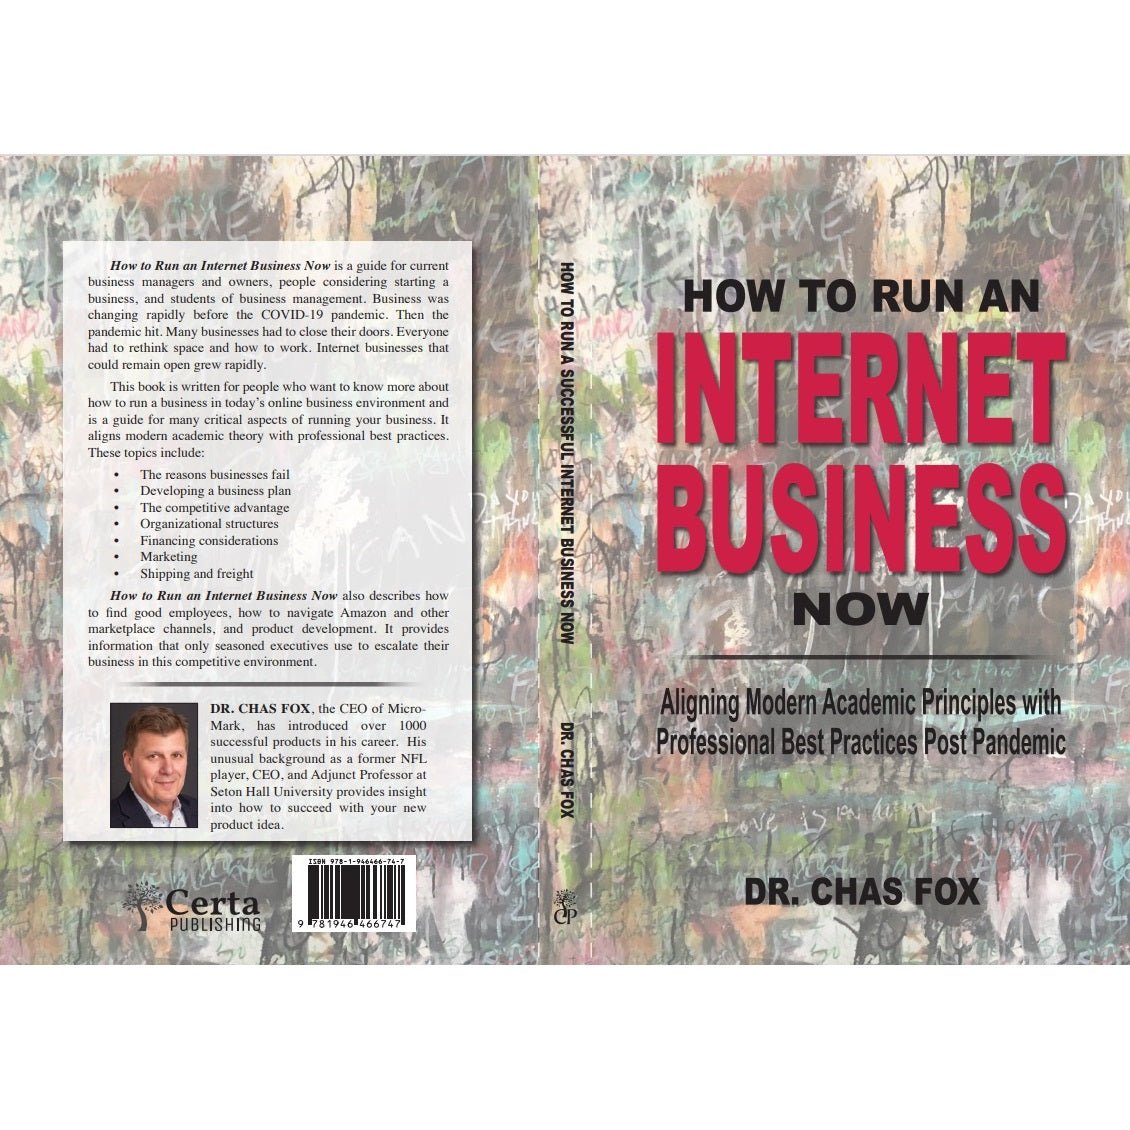 How to Run an Internet Business Now Book by Dr. Chas Fox